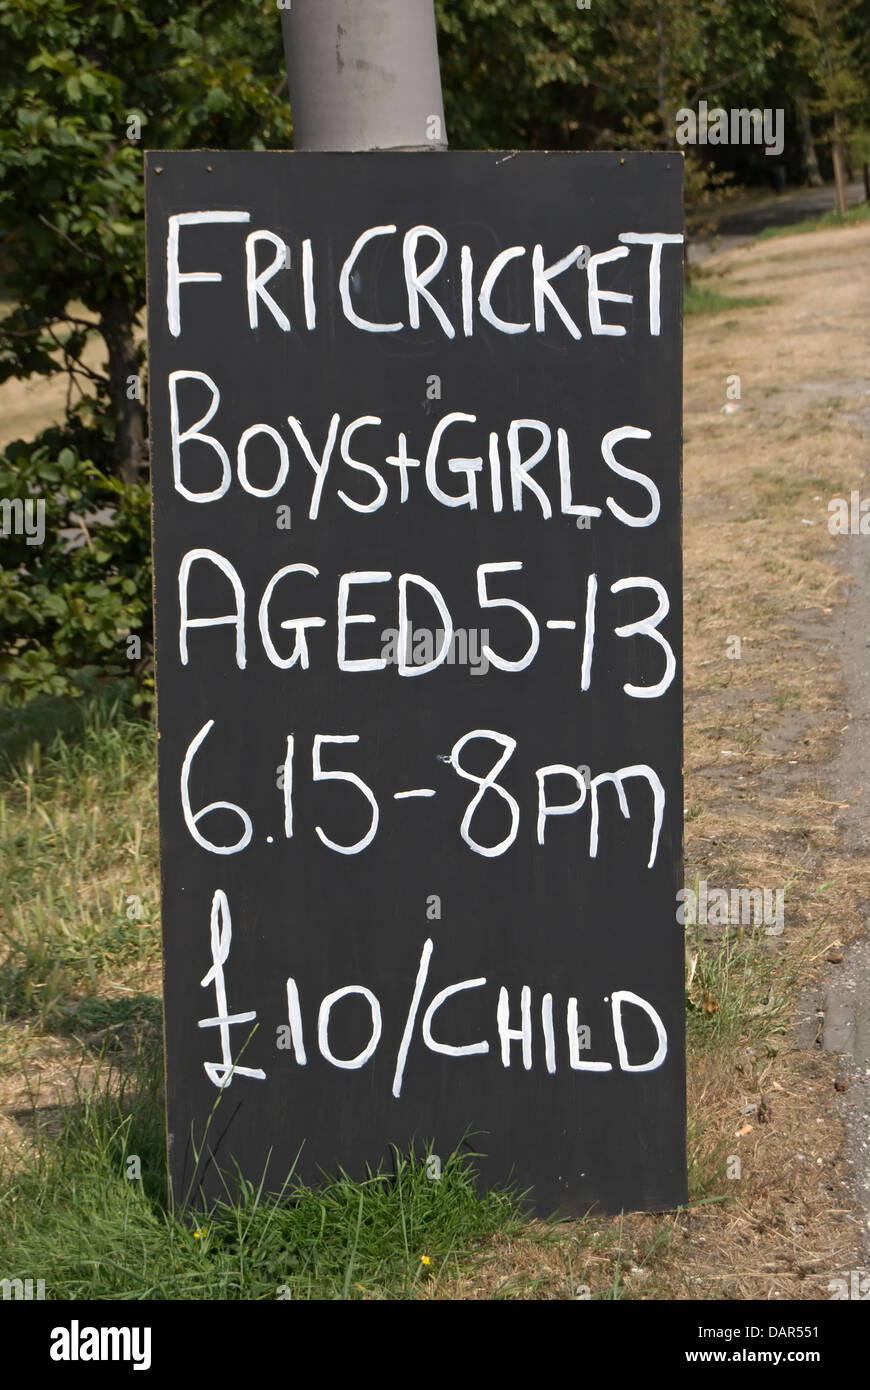 handmade road side sign advertising friday cricket for young boys and girls, richmond, surrey, england Stock Photo